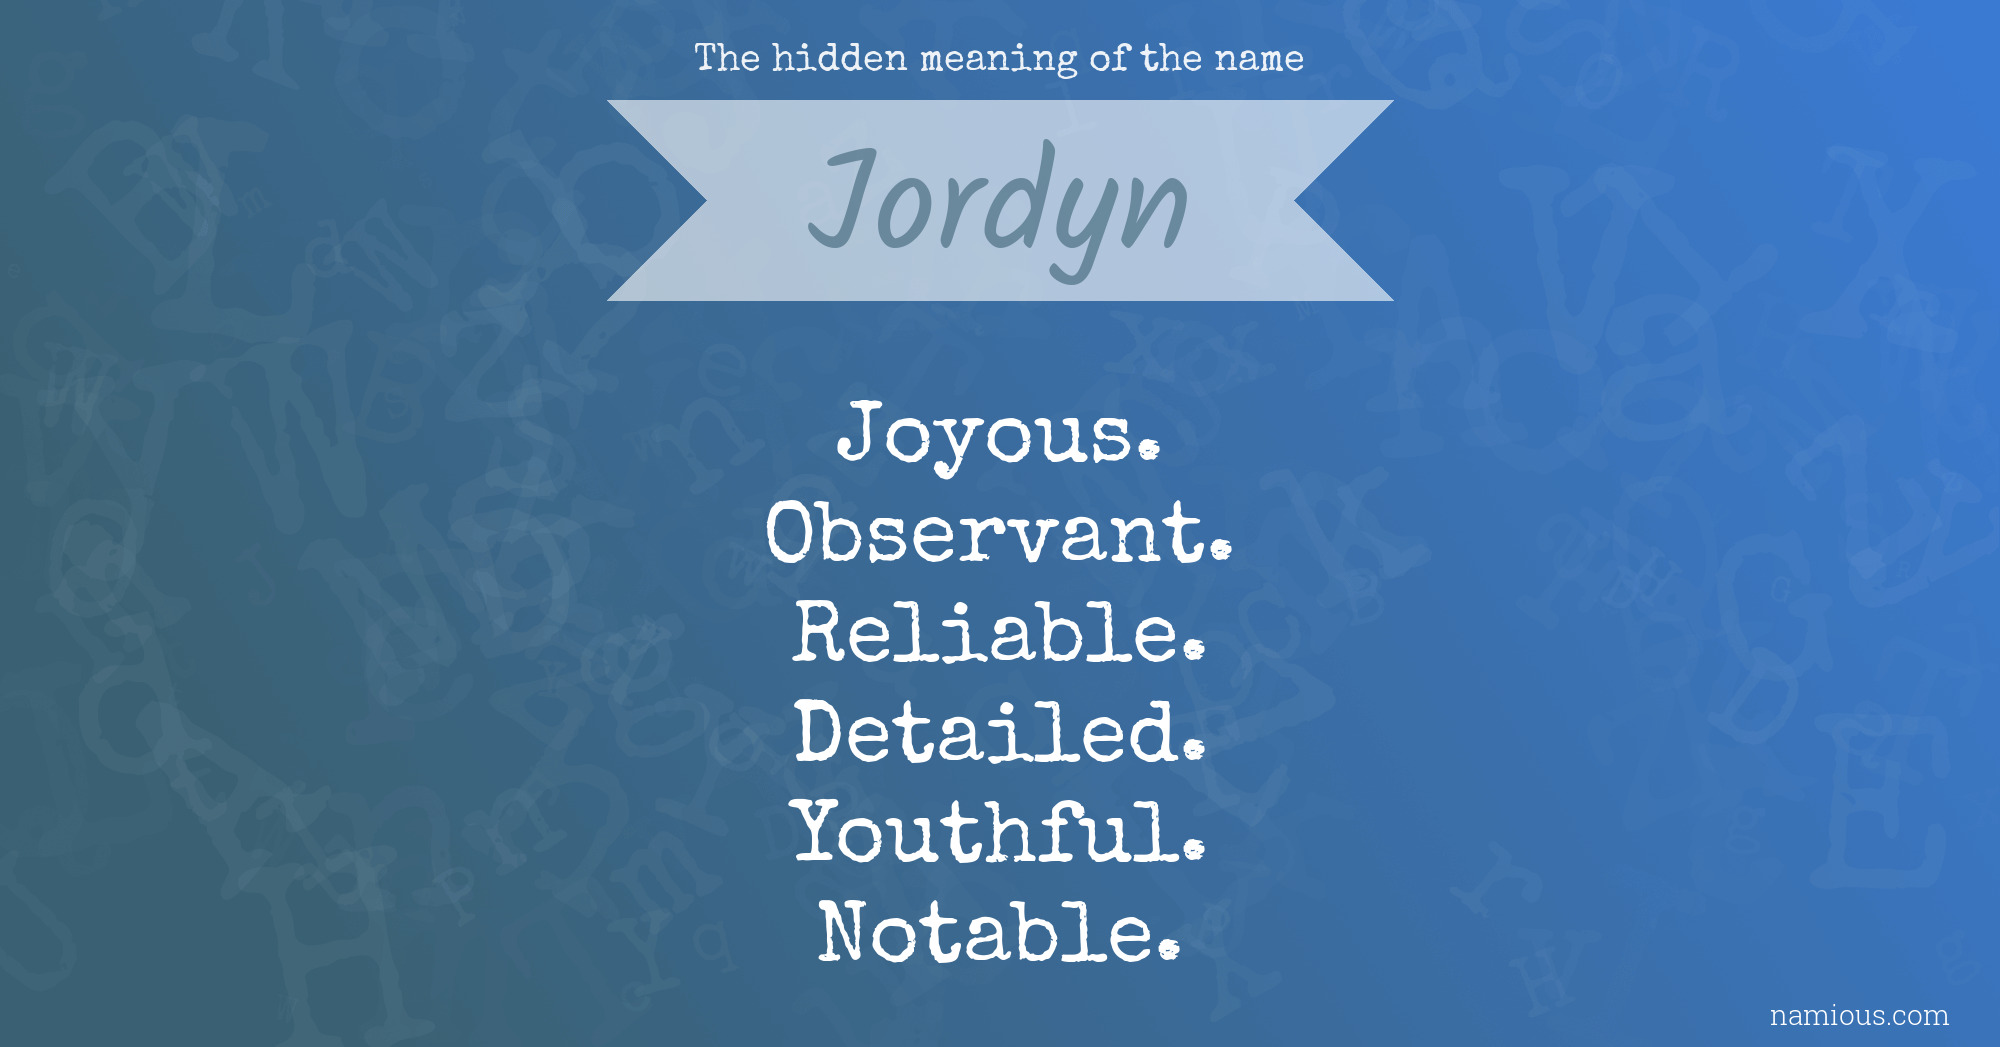 The hidden meaning of the name Jordyn